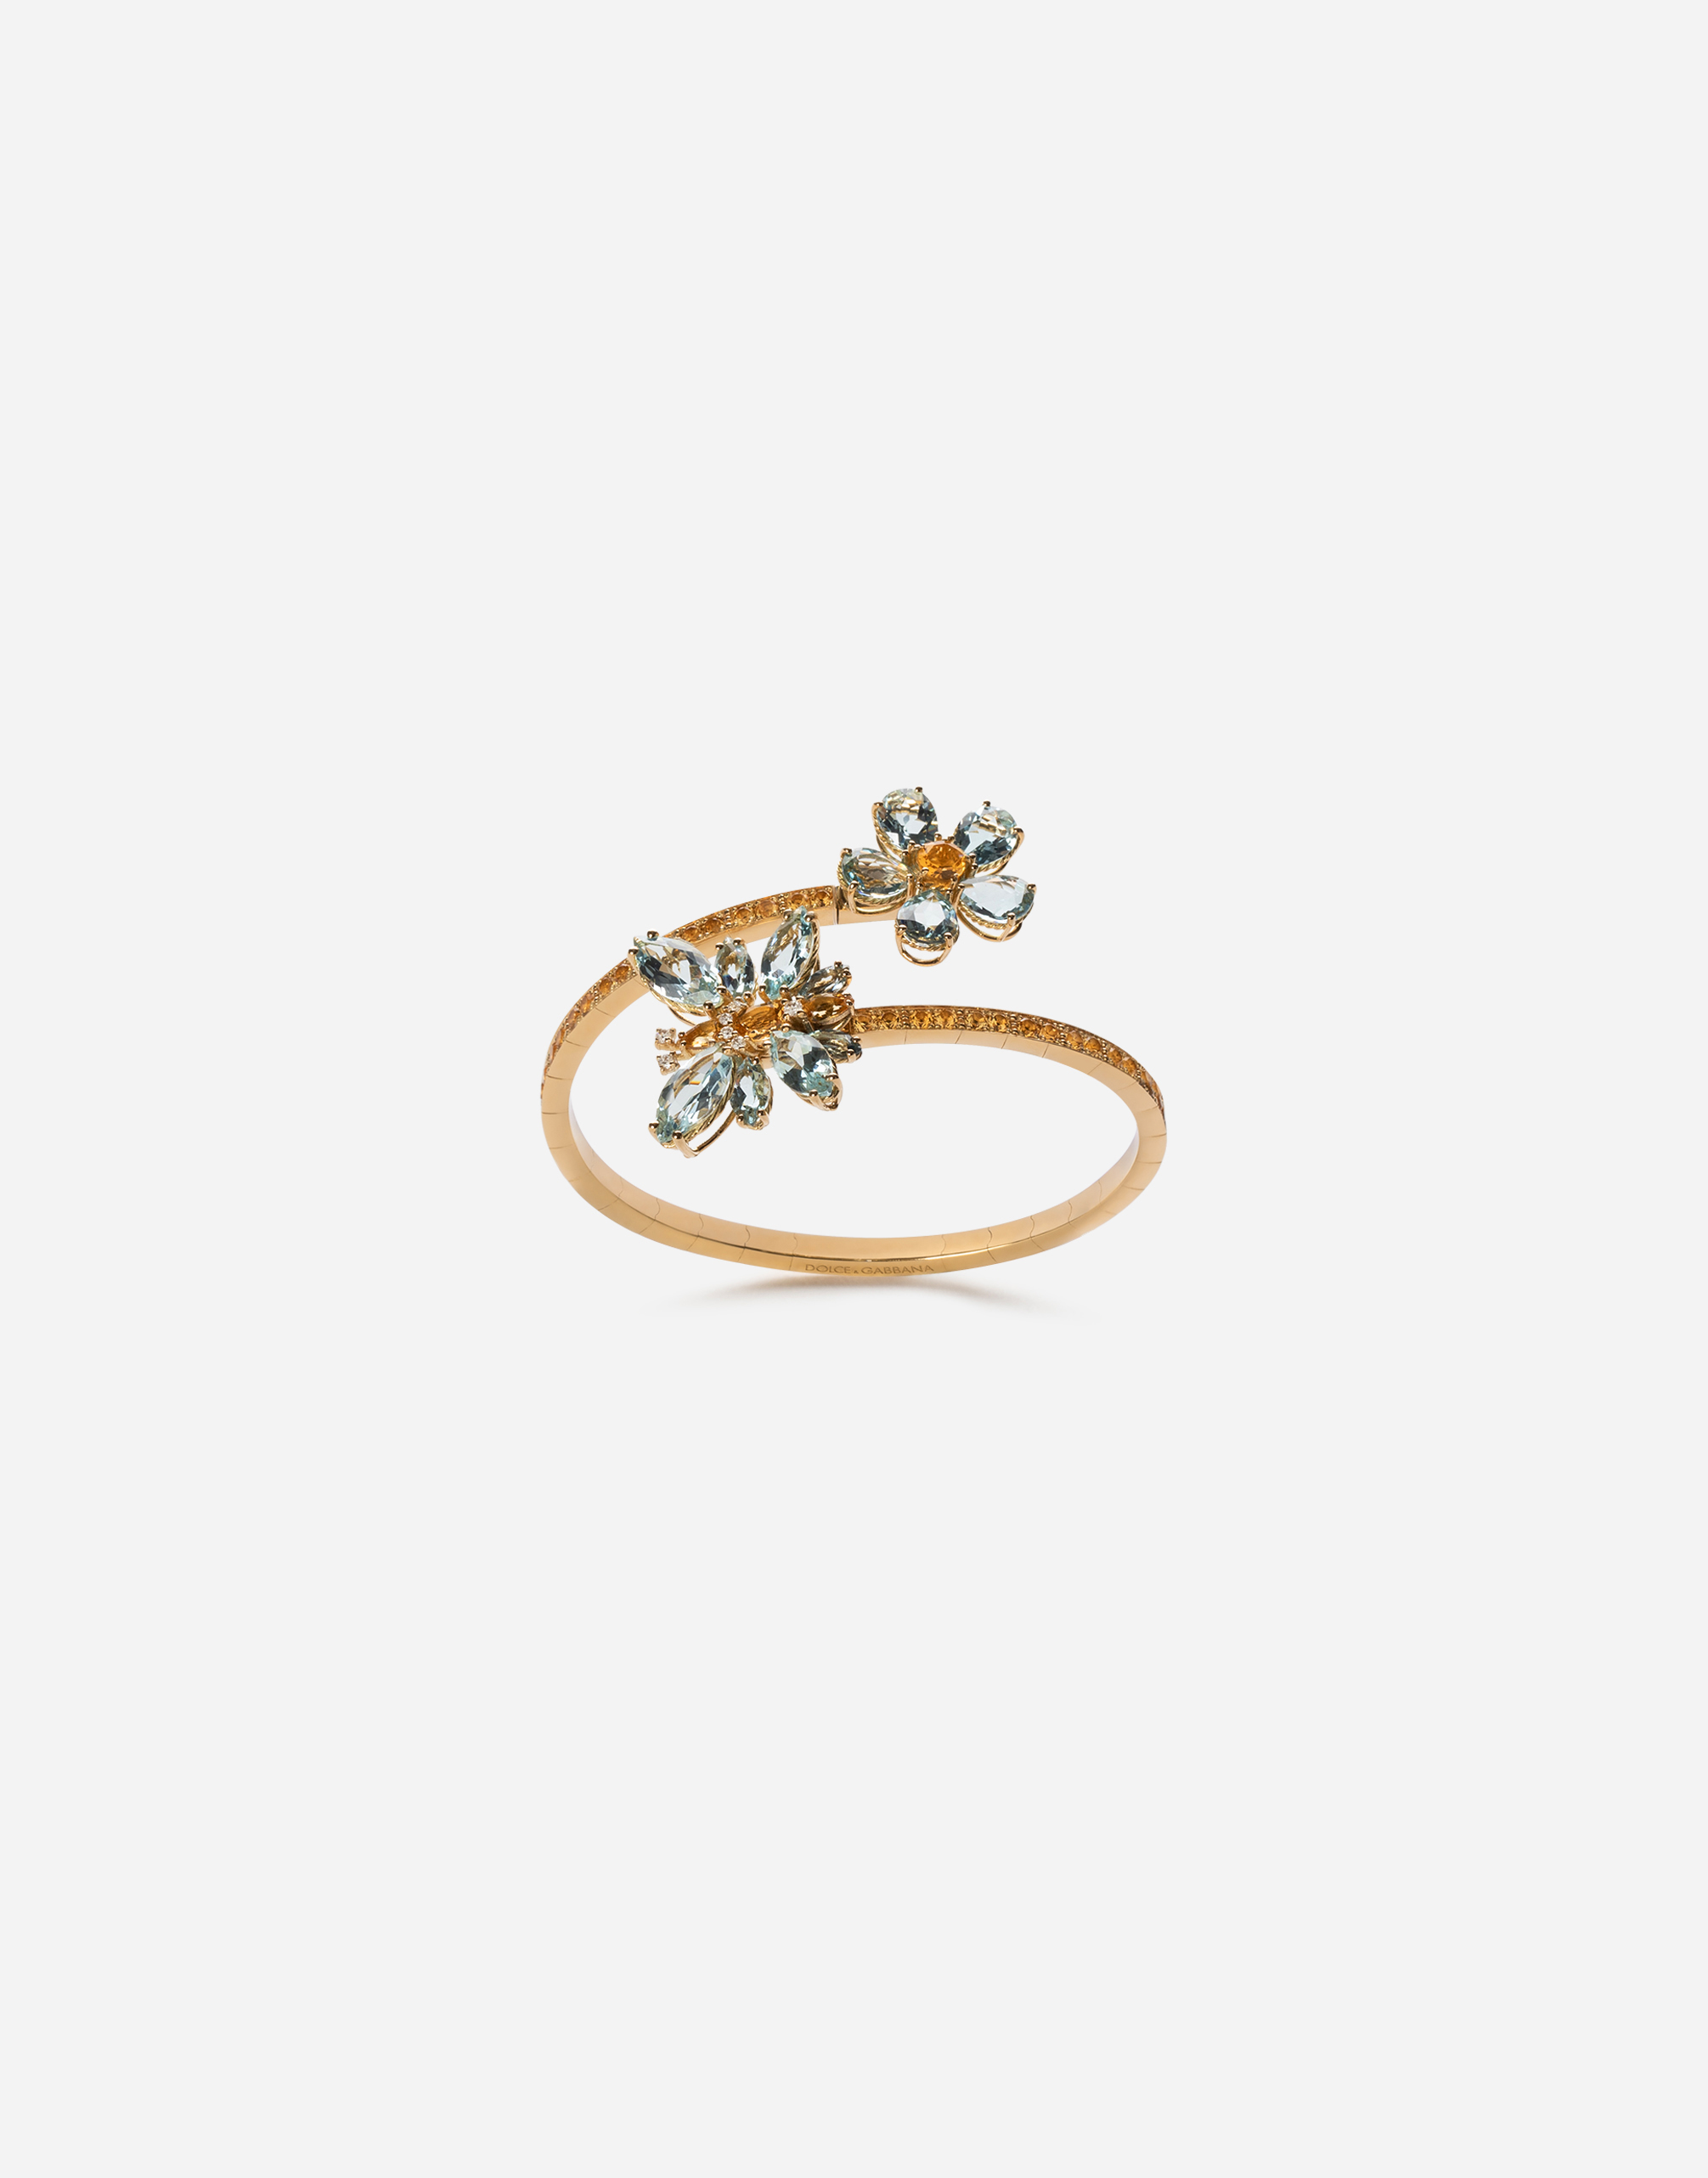 Spring yellow gold bracelet with butterfly-shaped settings and floral decoration in Gold